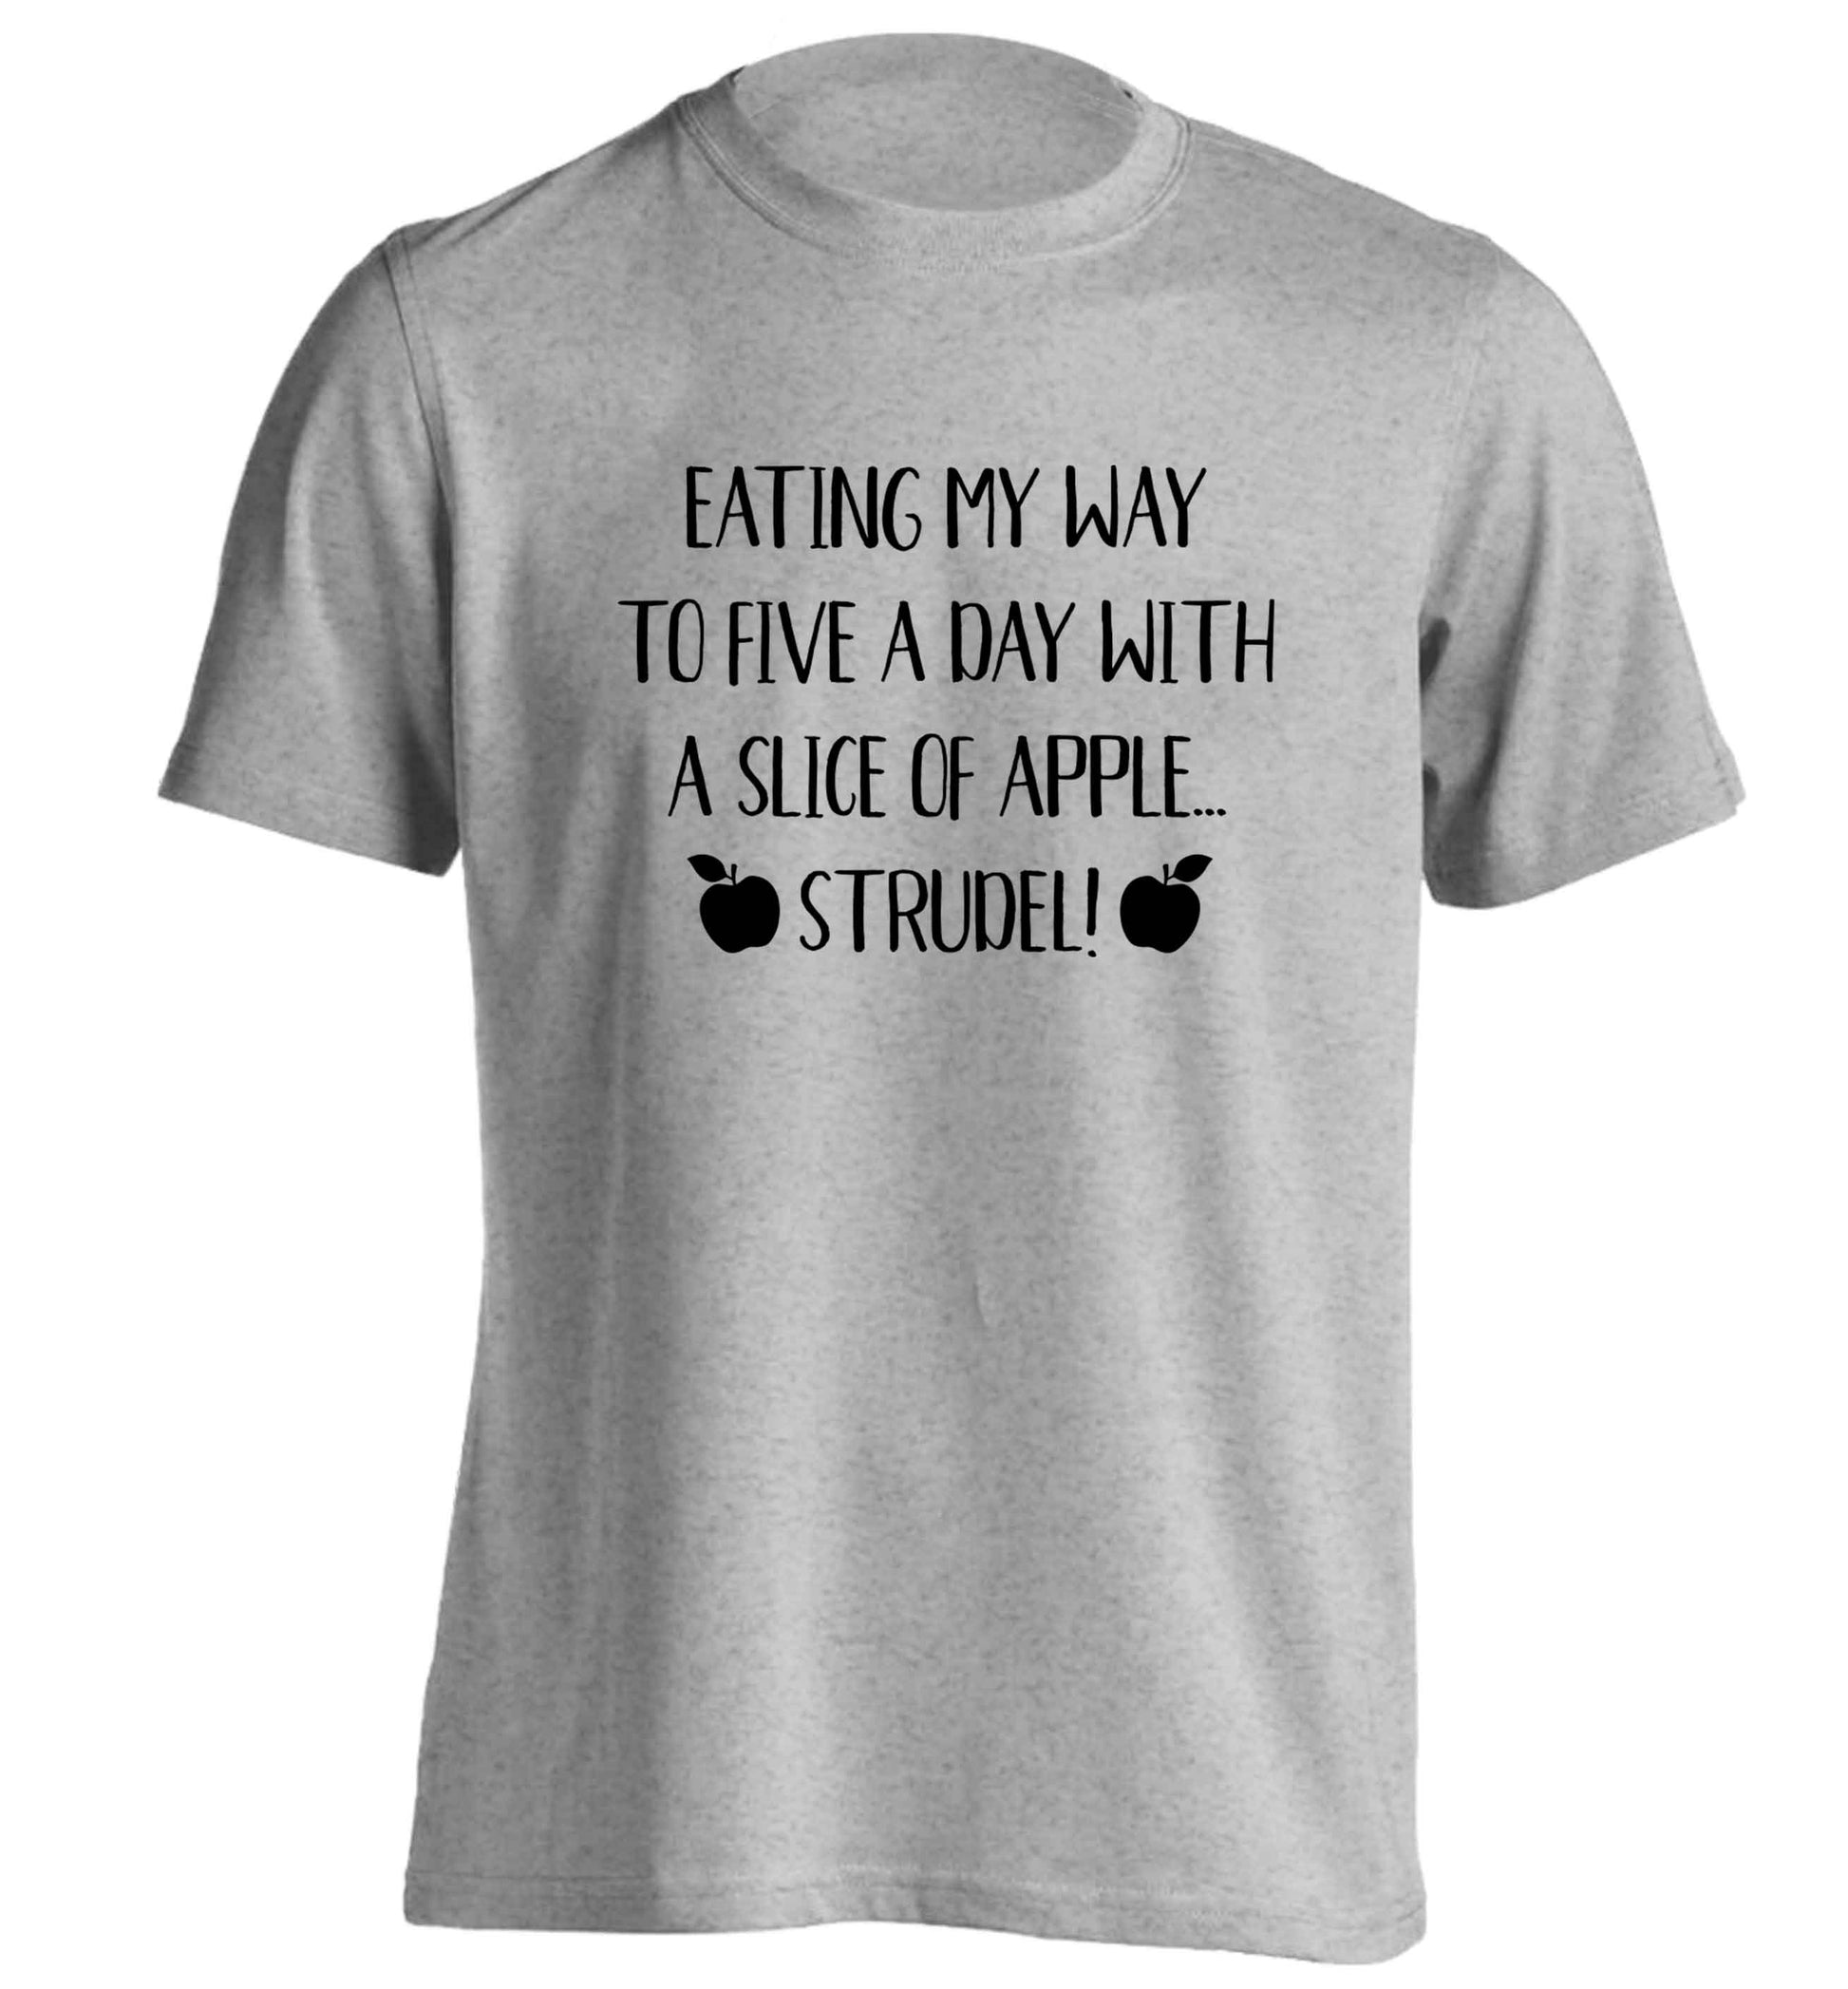 Eating my way to five a day with a slice of apple strudel adults unisex grey Tshirt 2XL